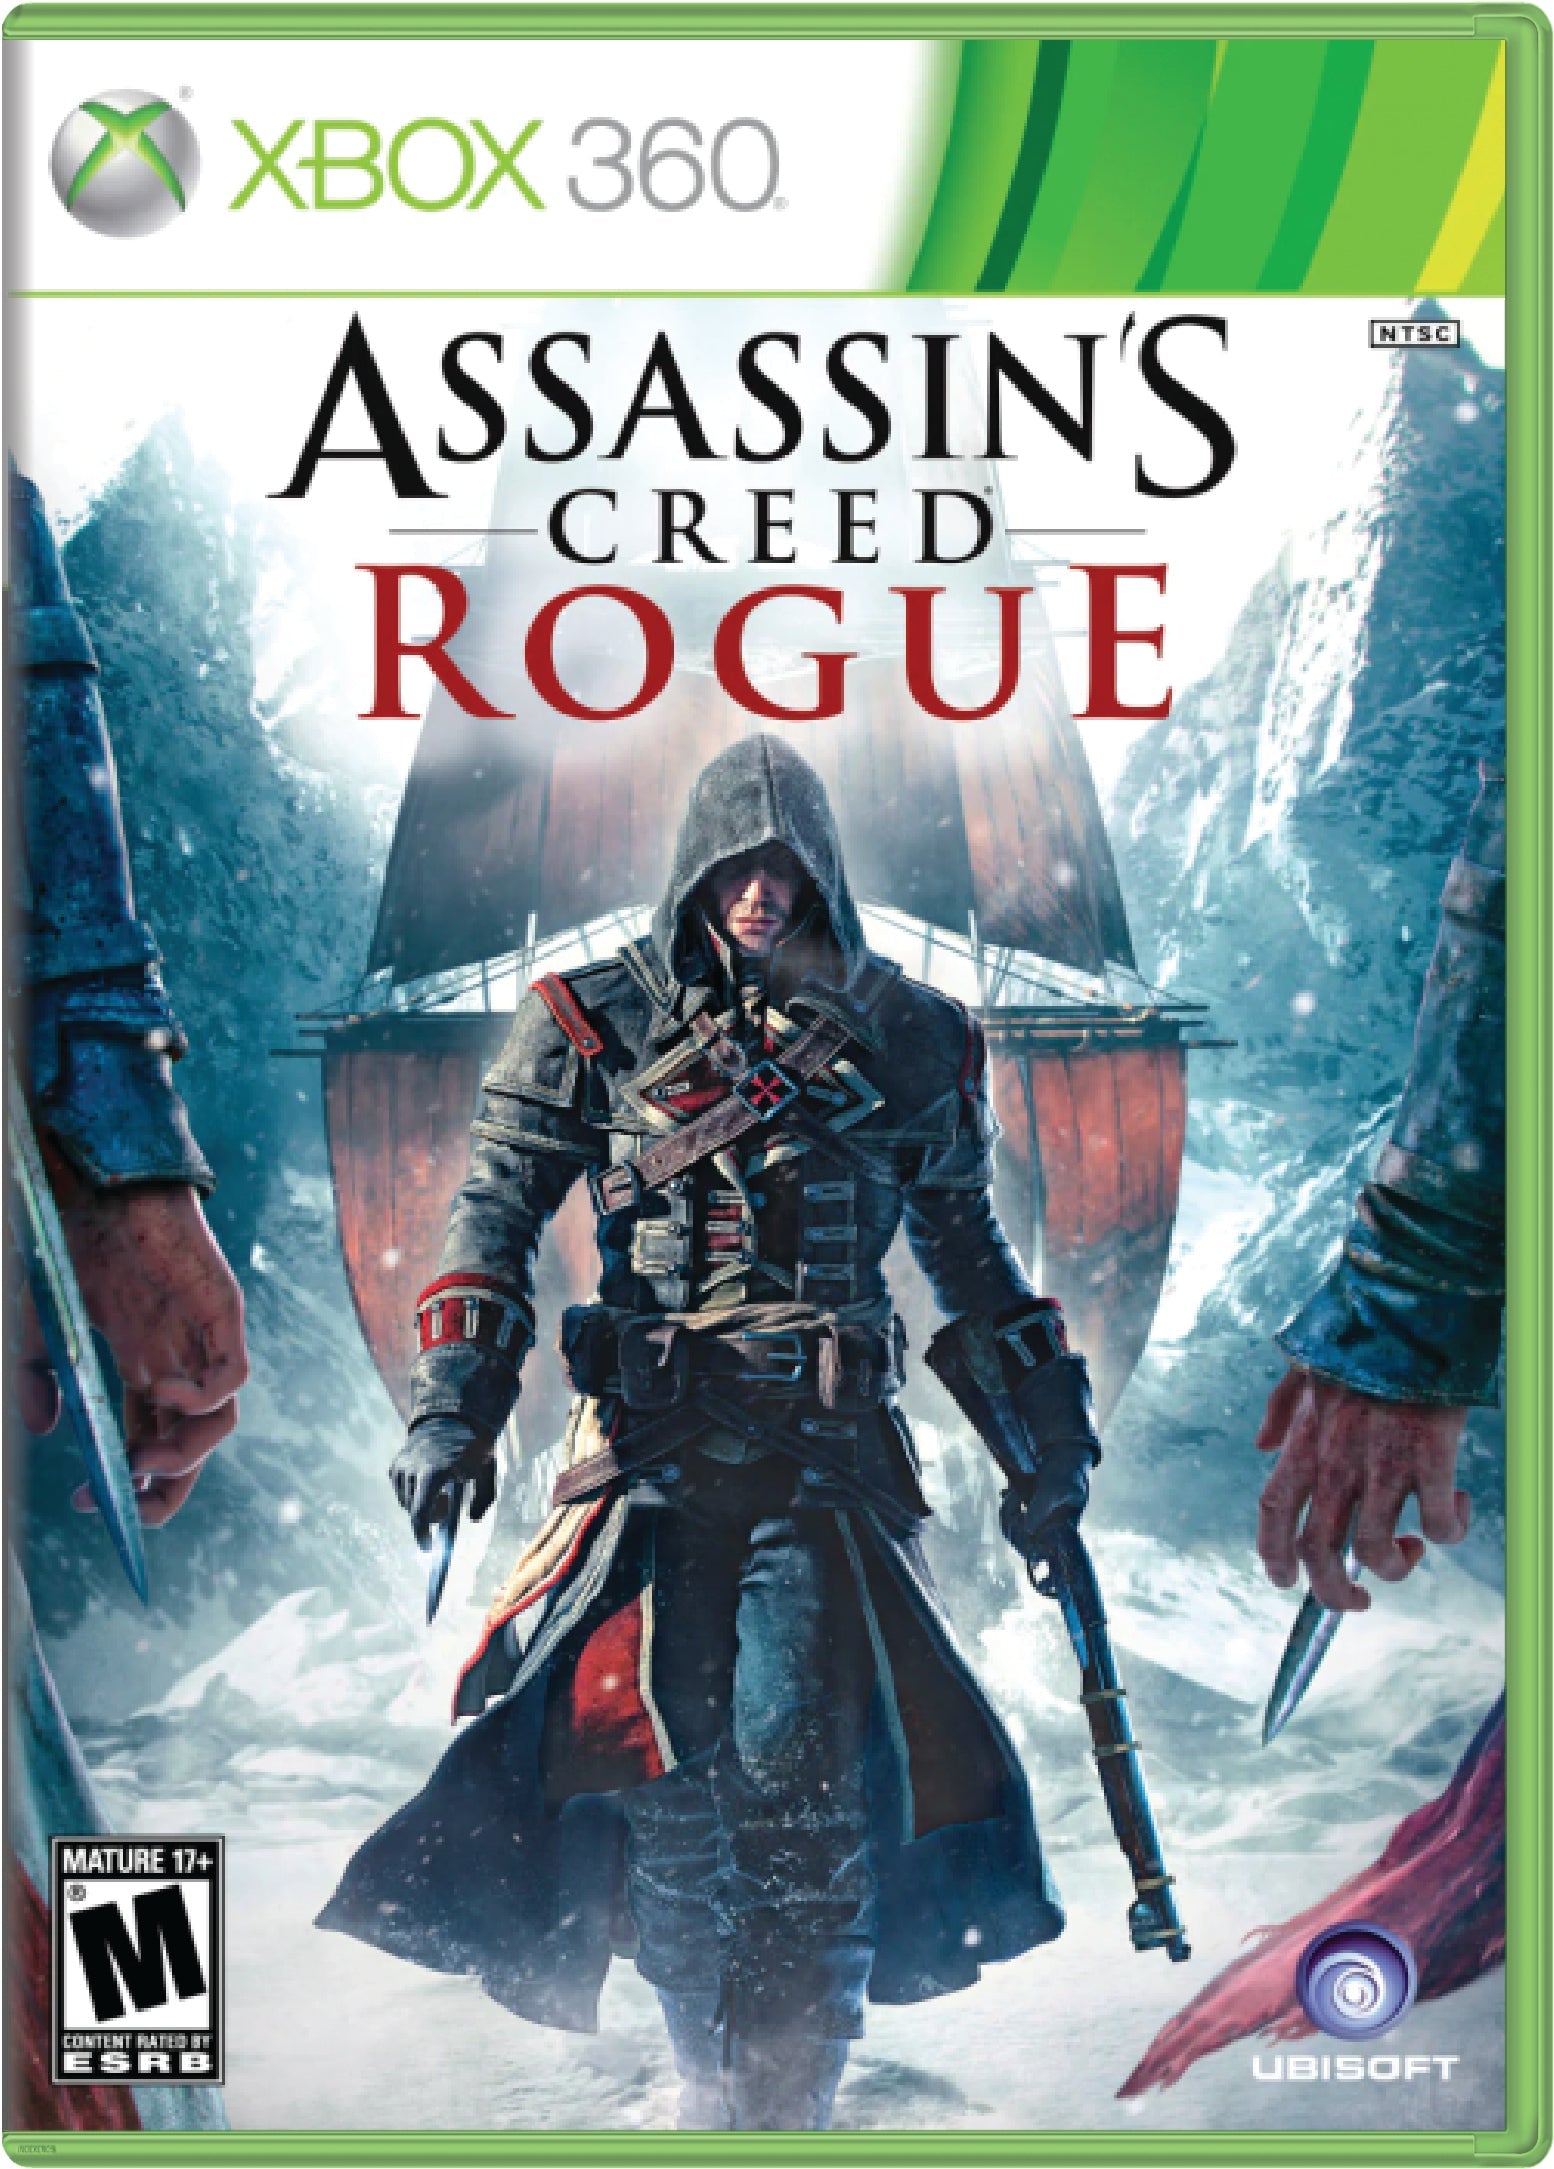 Assassin's Creed Rogue Cover Art